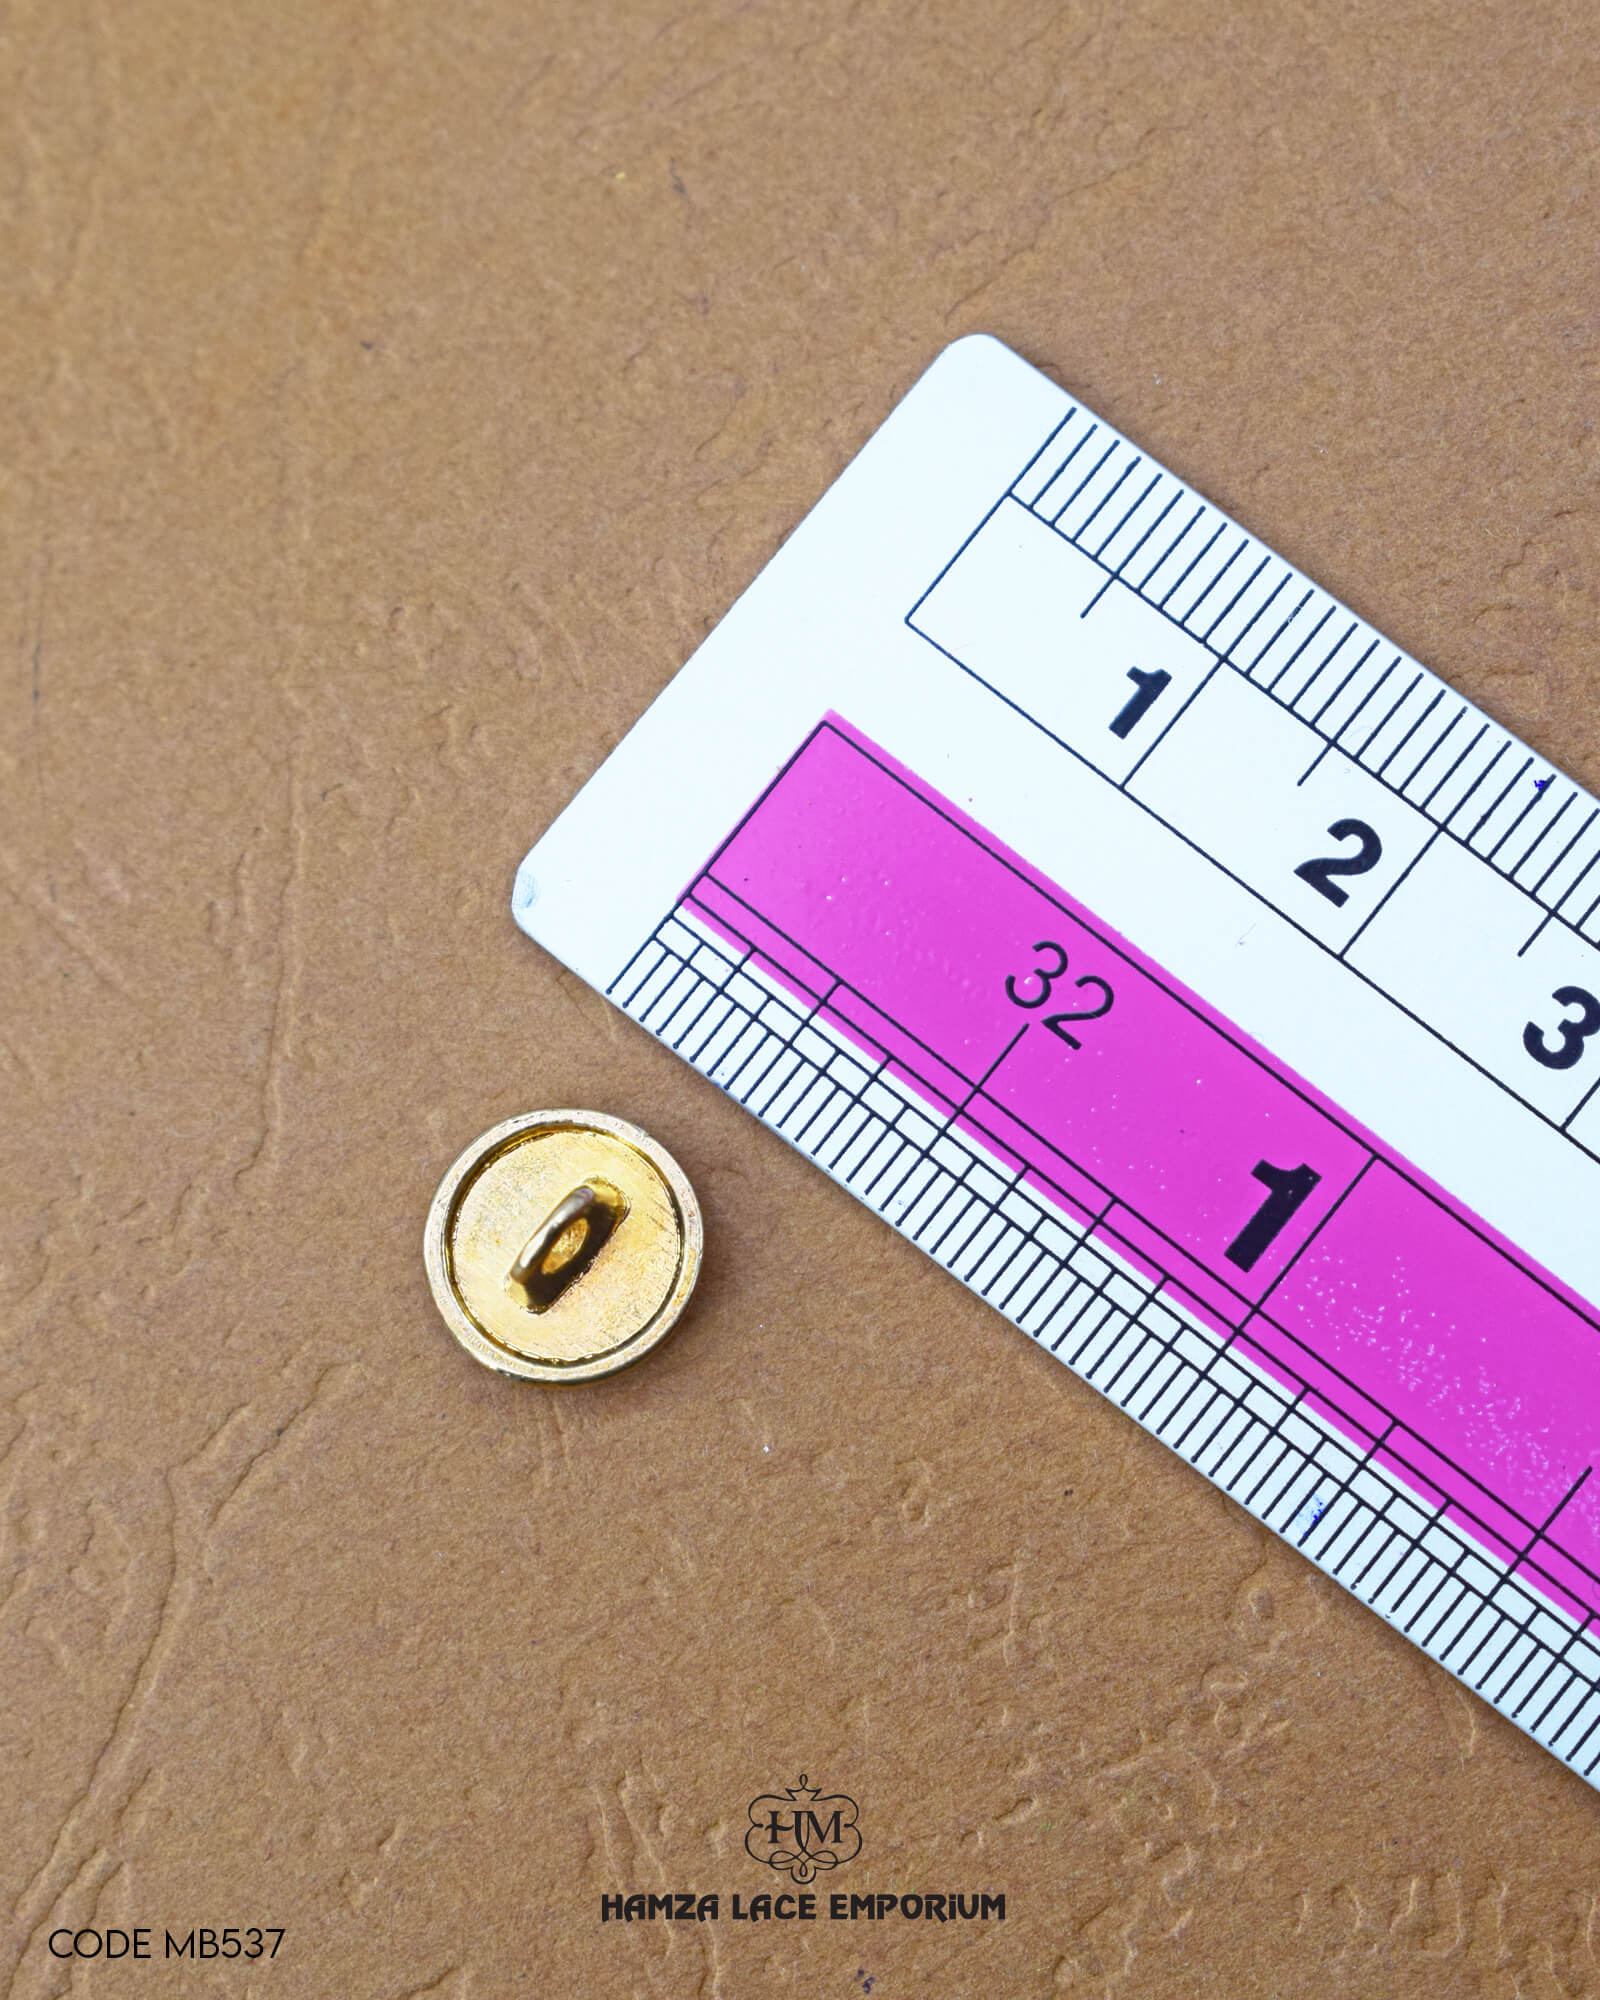 The size of the 'Metal Suiting Button MB537' is measured by using a ruler